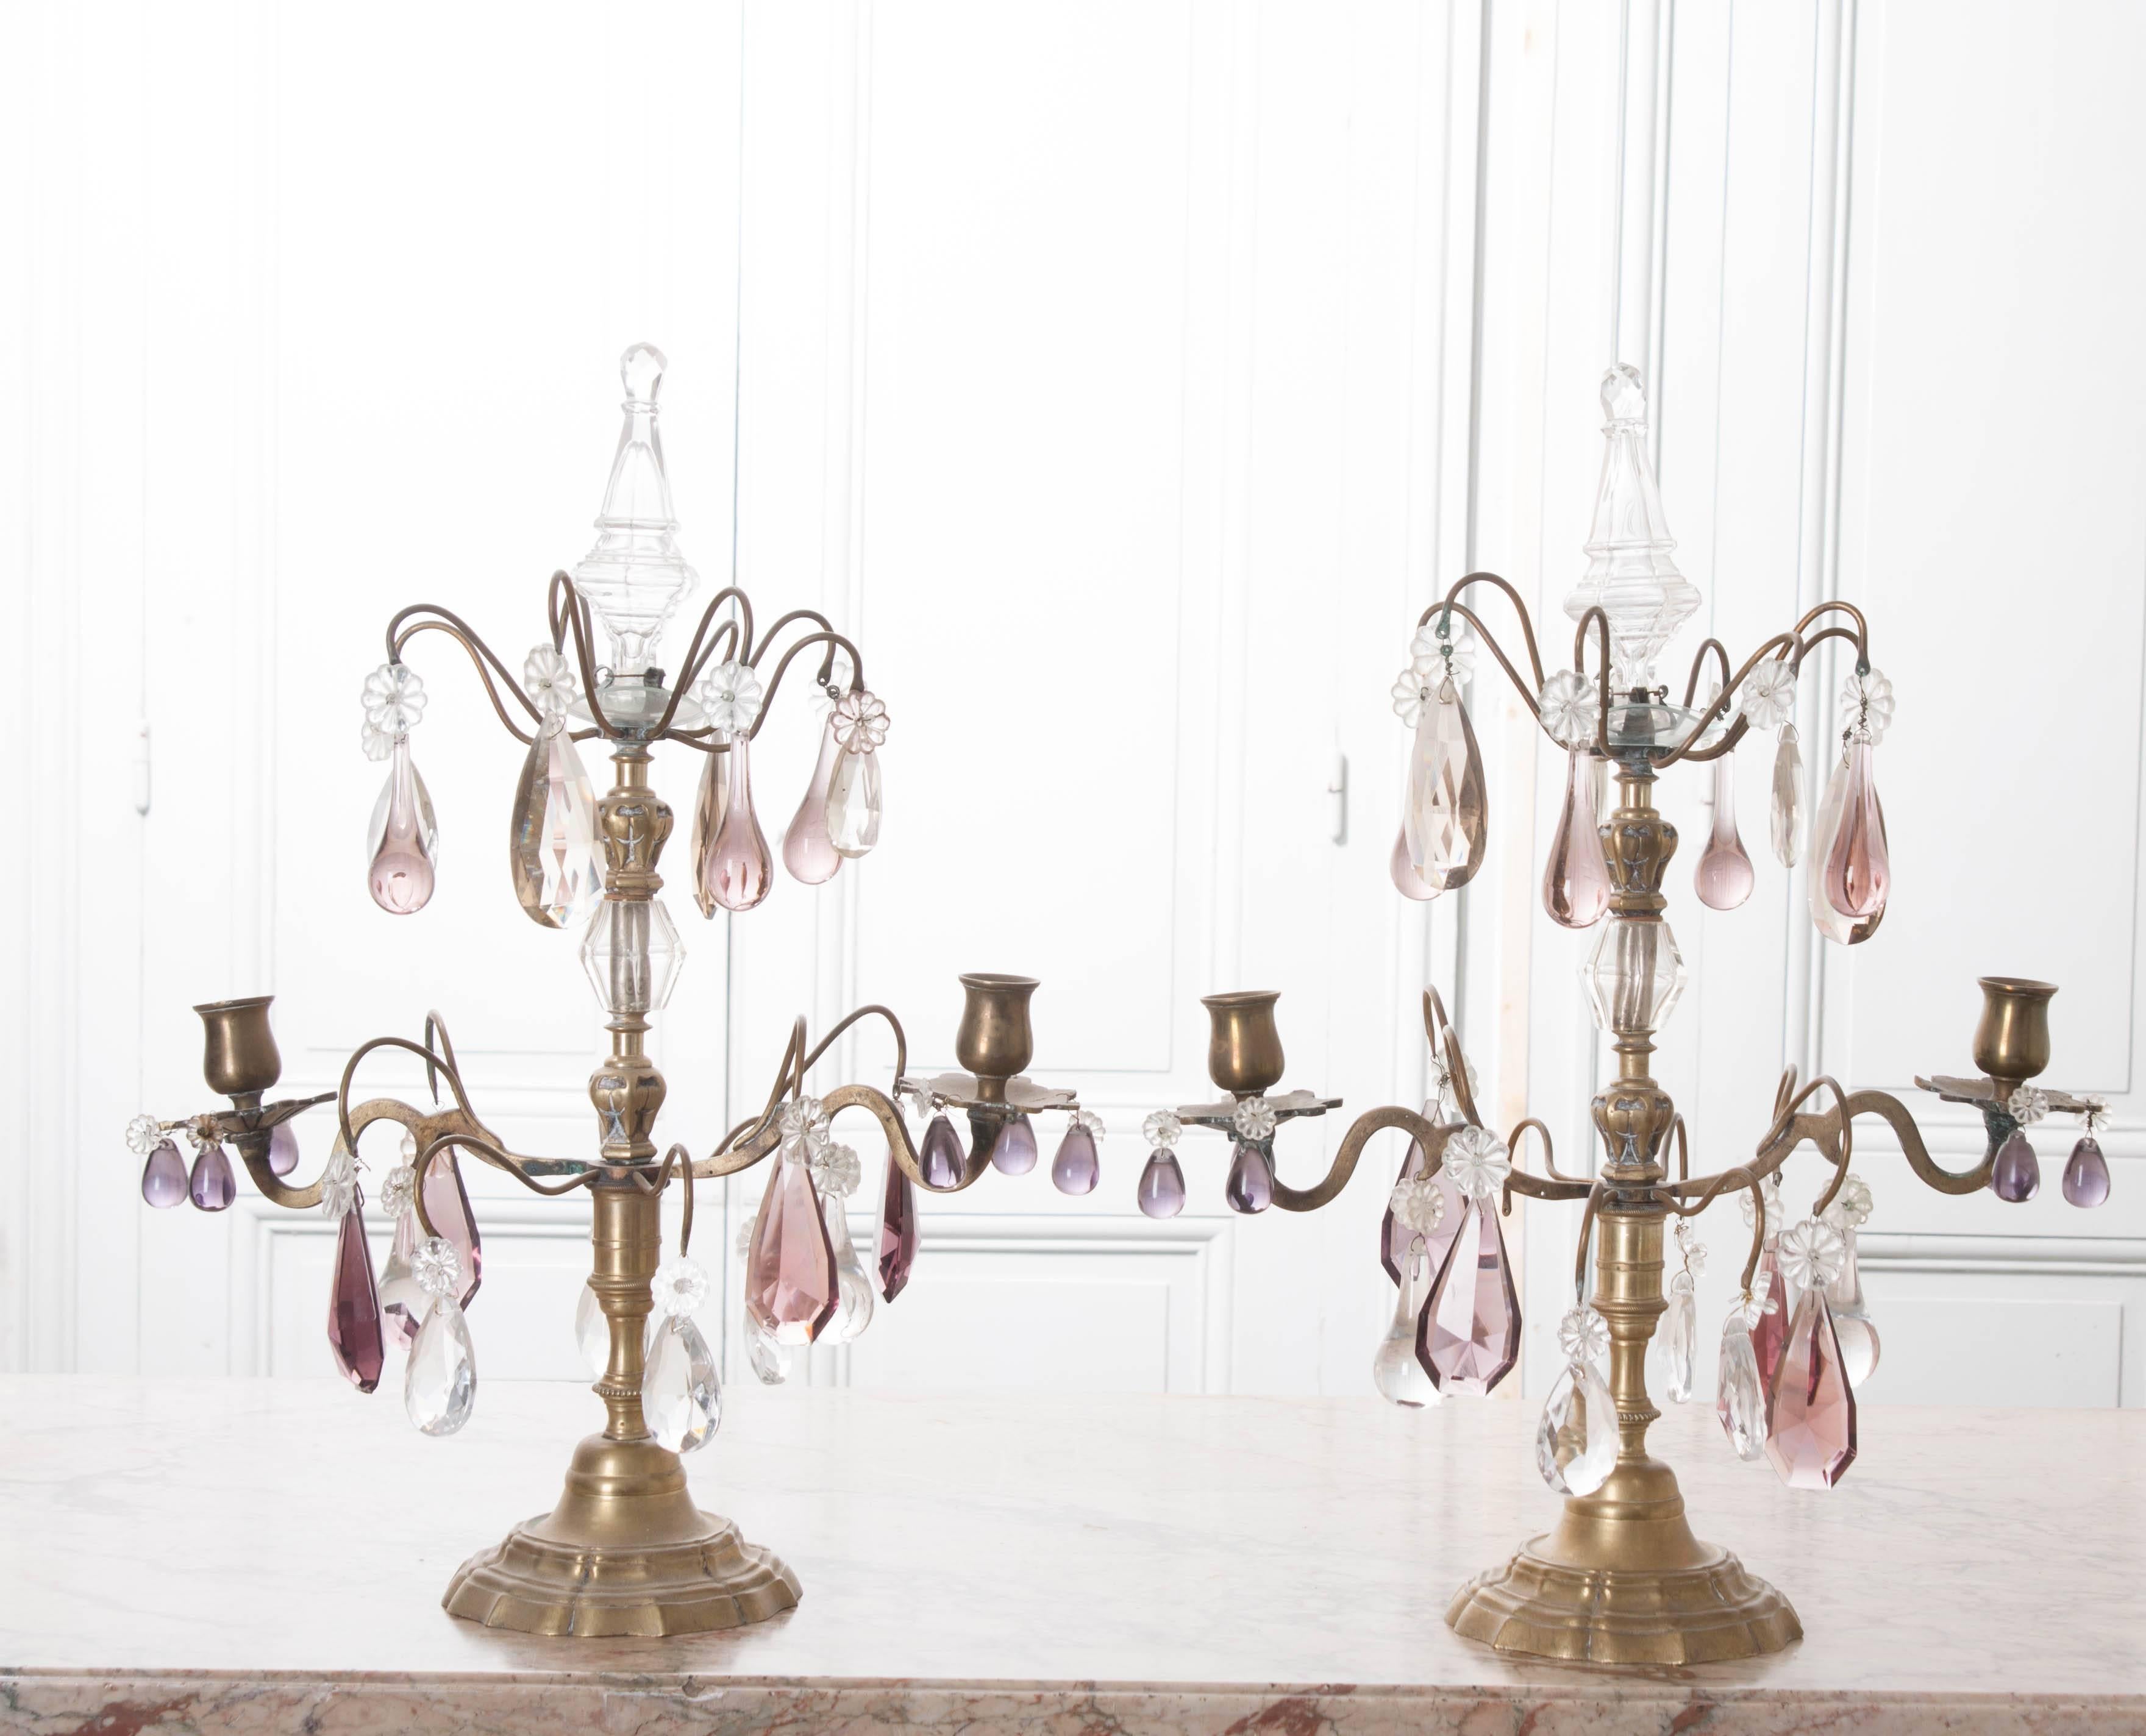 This gorgeous pair of petite brass and crystal candelabra girandoles were masterfully crafted in 19th century, France. Each girandole has two arms, each of which holds a single candle. Beautiful colored crystals drip from the brass bobeches and